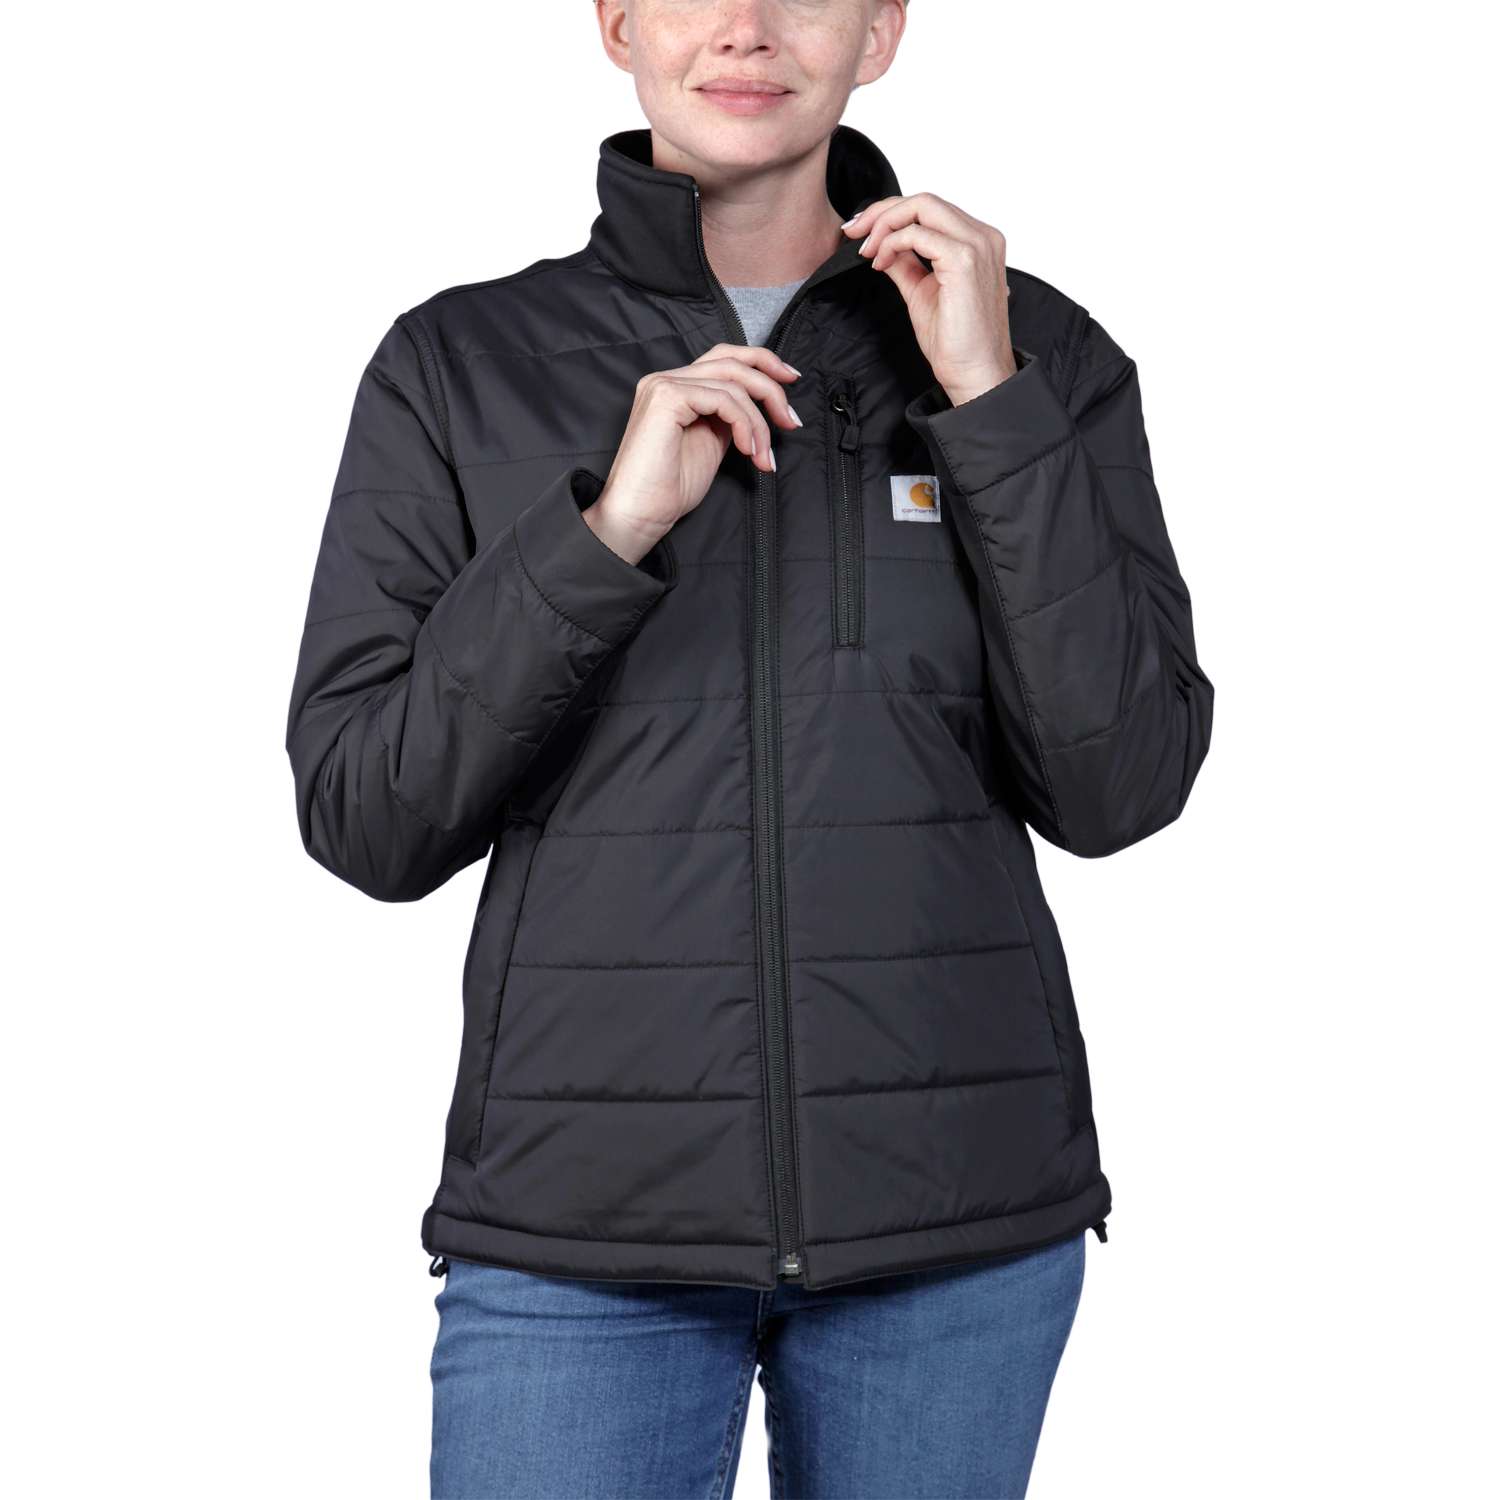 RELAXED_FIT_LIGHT_INSULATED_JACKET_PyBioNlna4